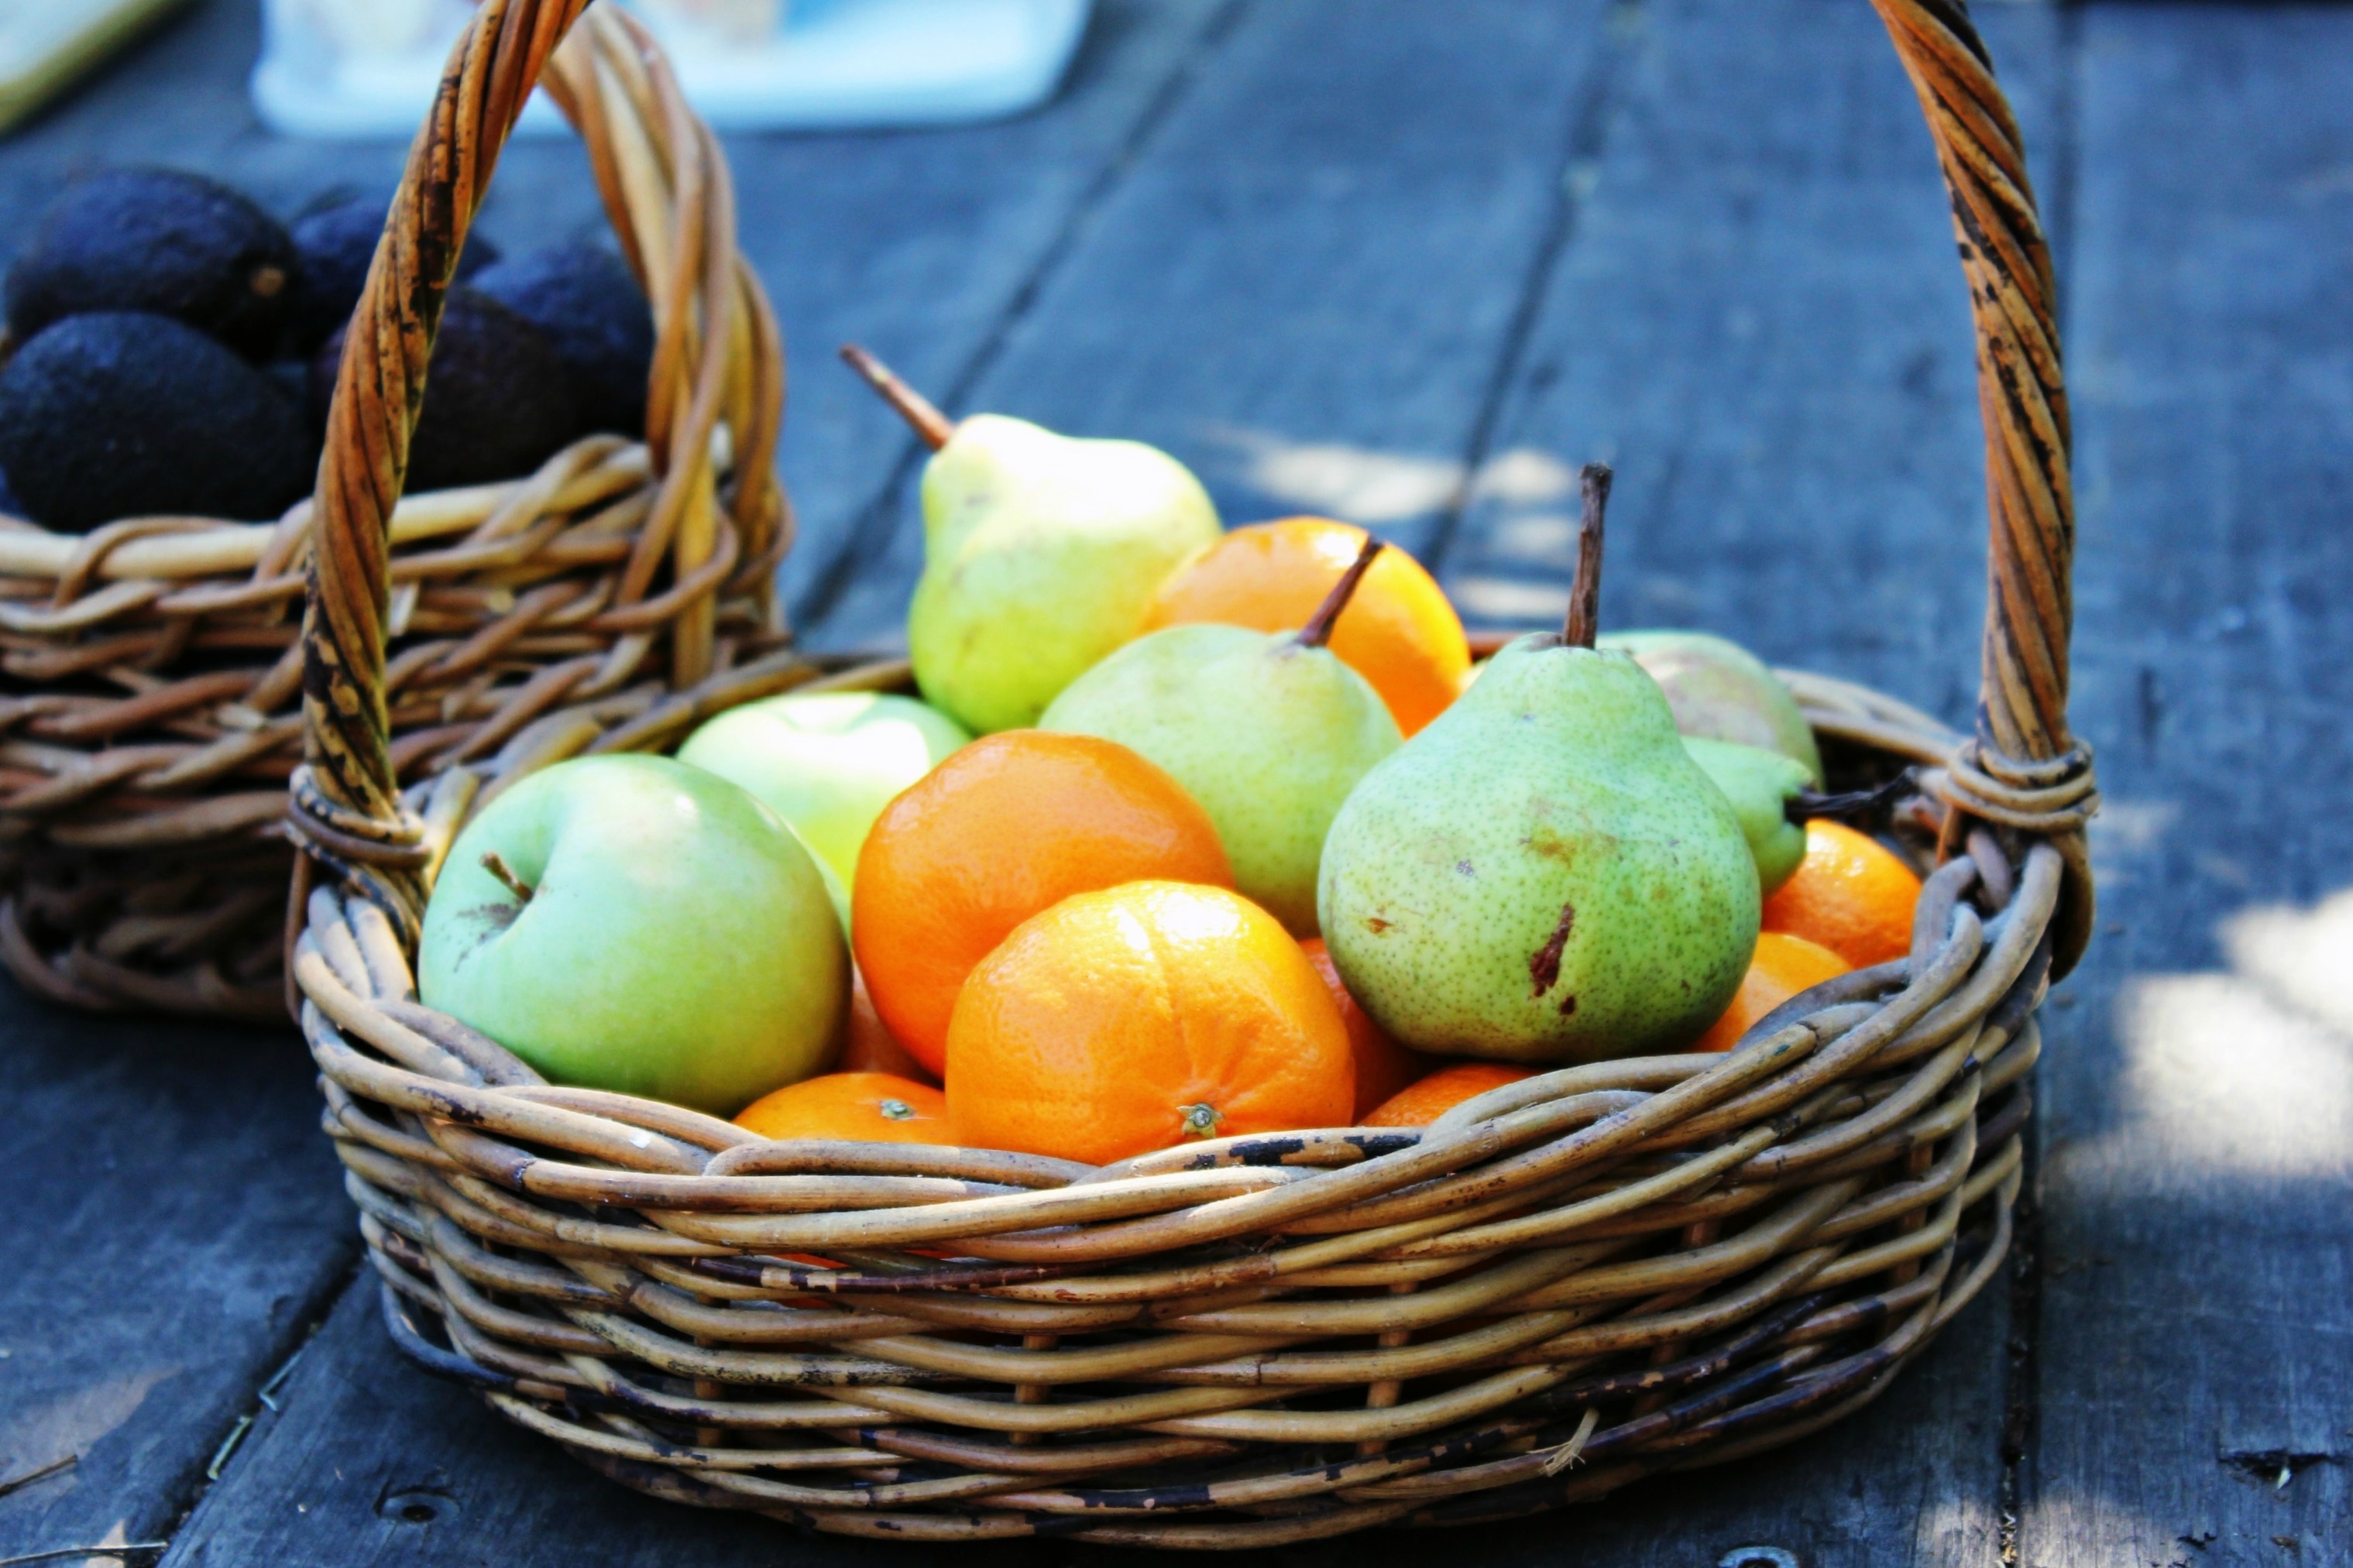 brown wicker basket with peaches apples and oranges